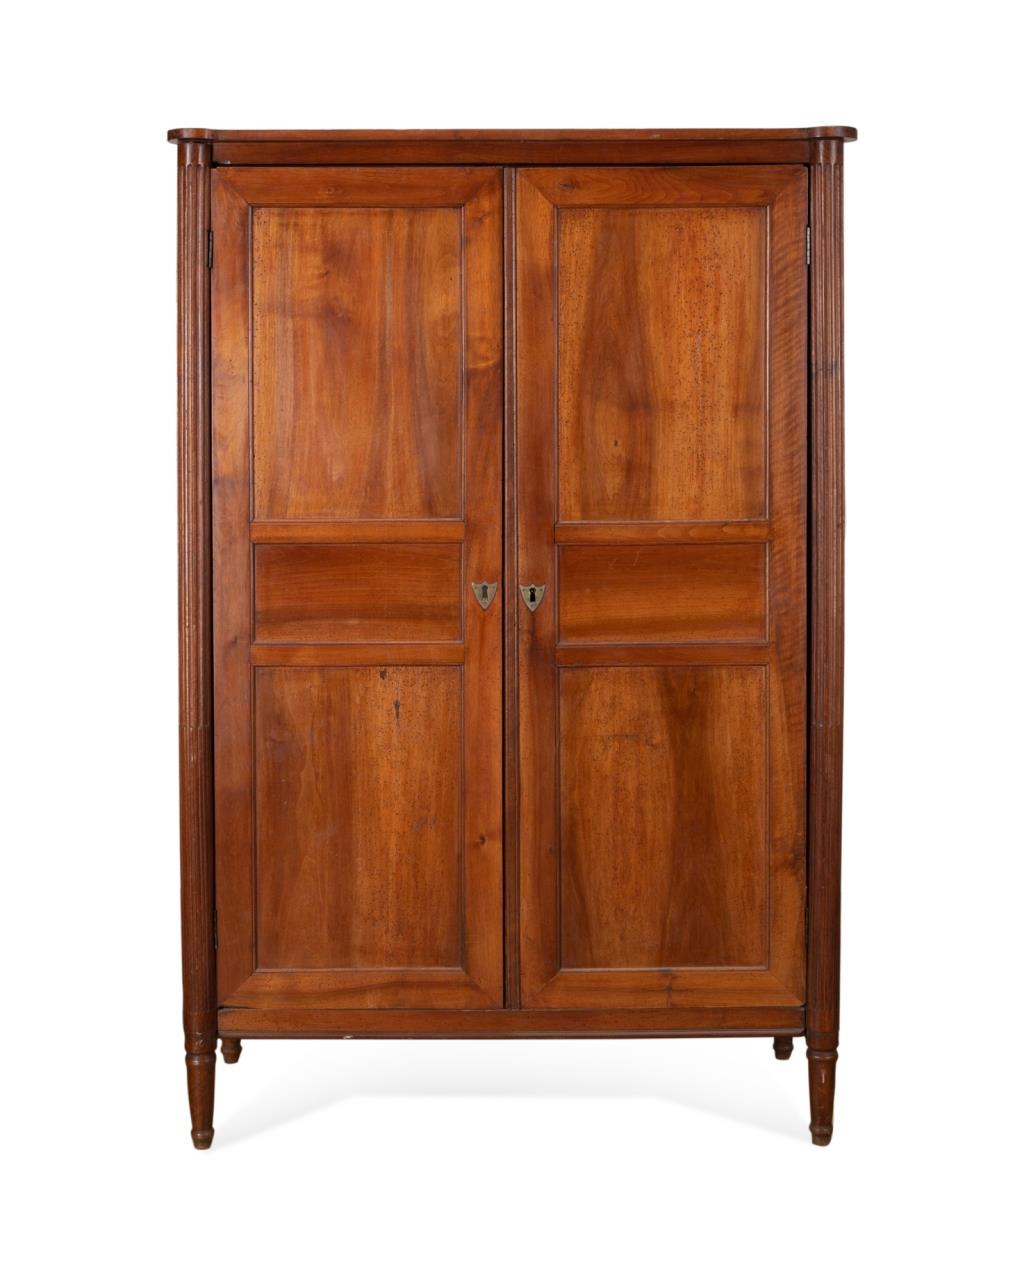 FRENCH EMPIRE STYLE WALNUT ARMOIRE